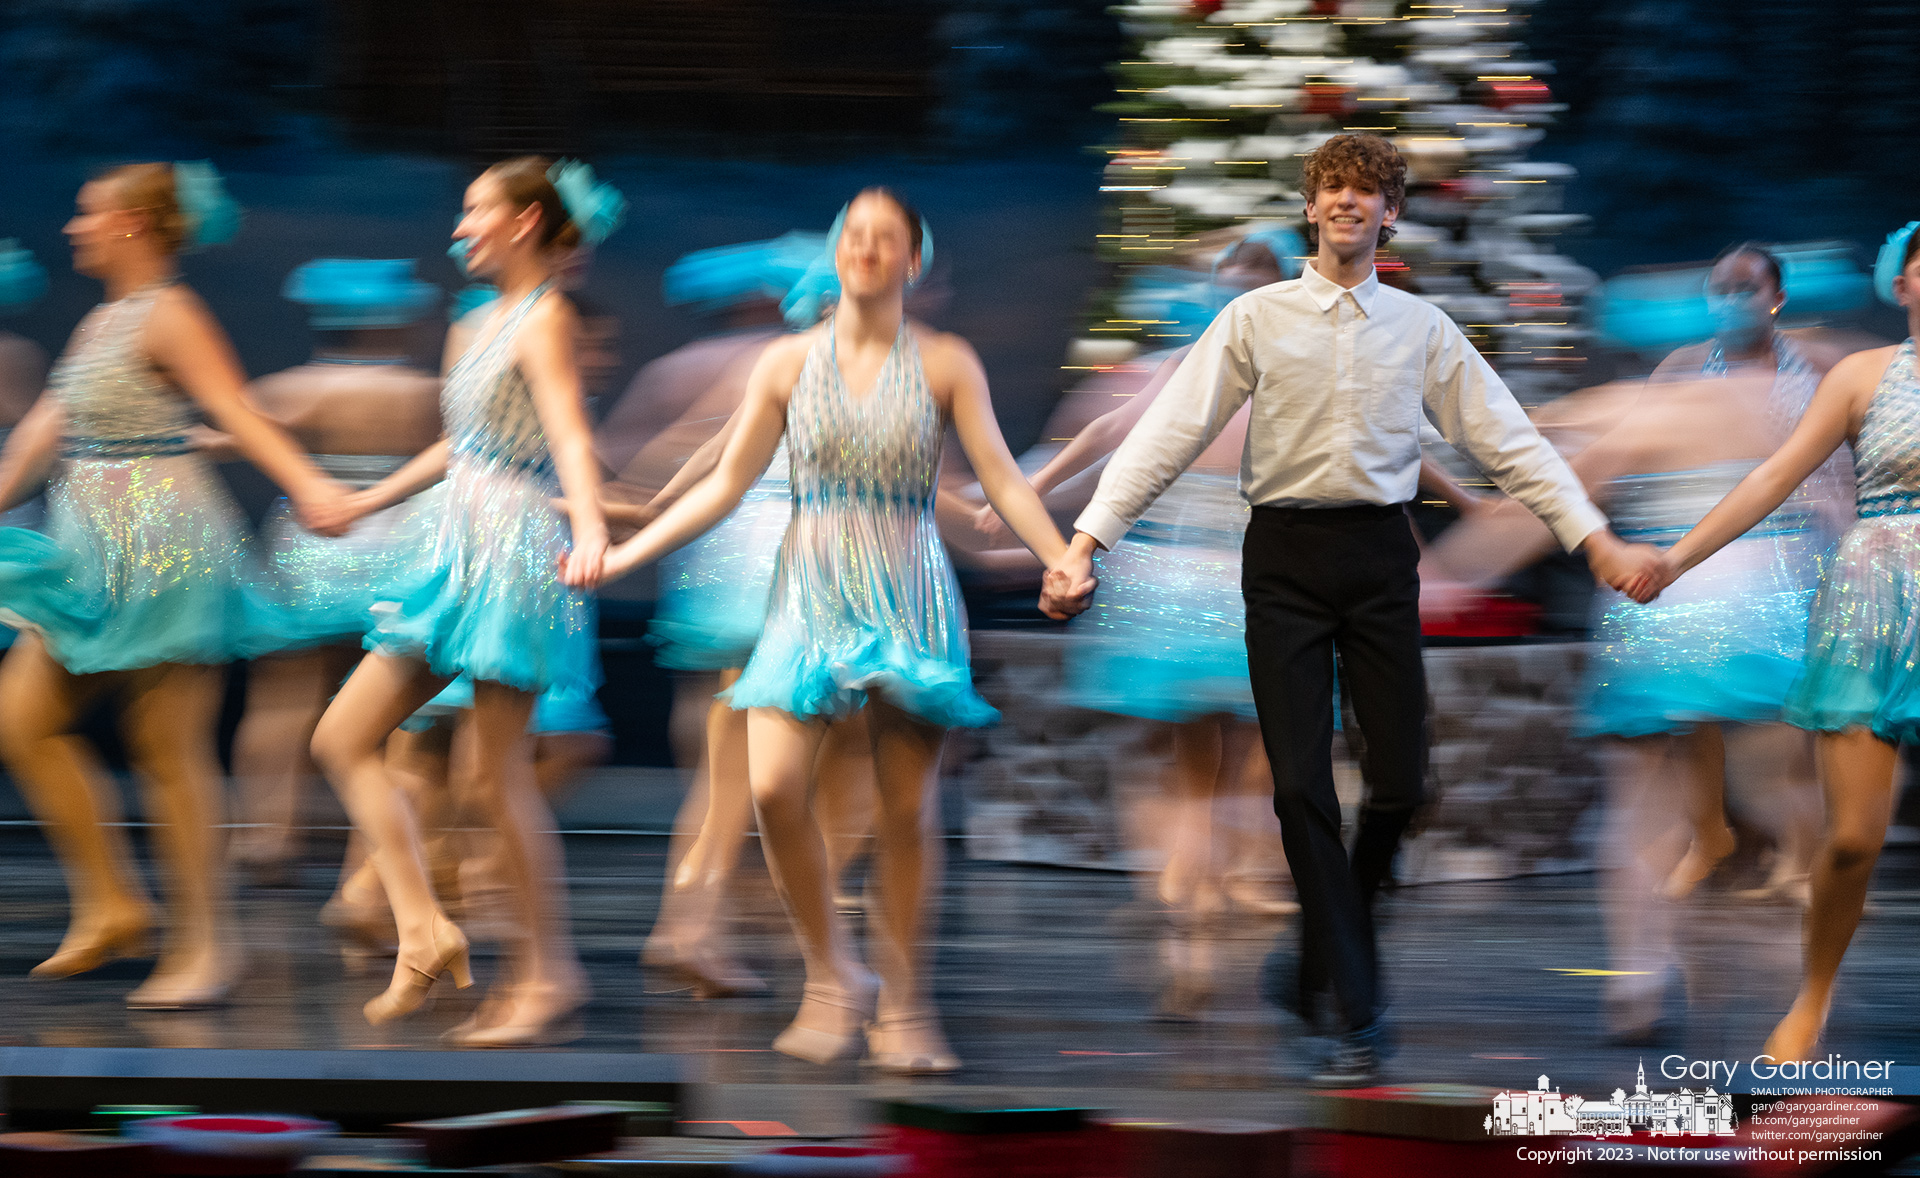 It was a blur of dancers performing in rehearsals Thursday night for Generations Performing Arts annual christmas show at Cowan Hall at Otterbein University. My Final Photo for December 14, 2023.